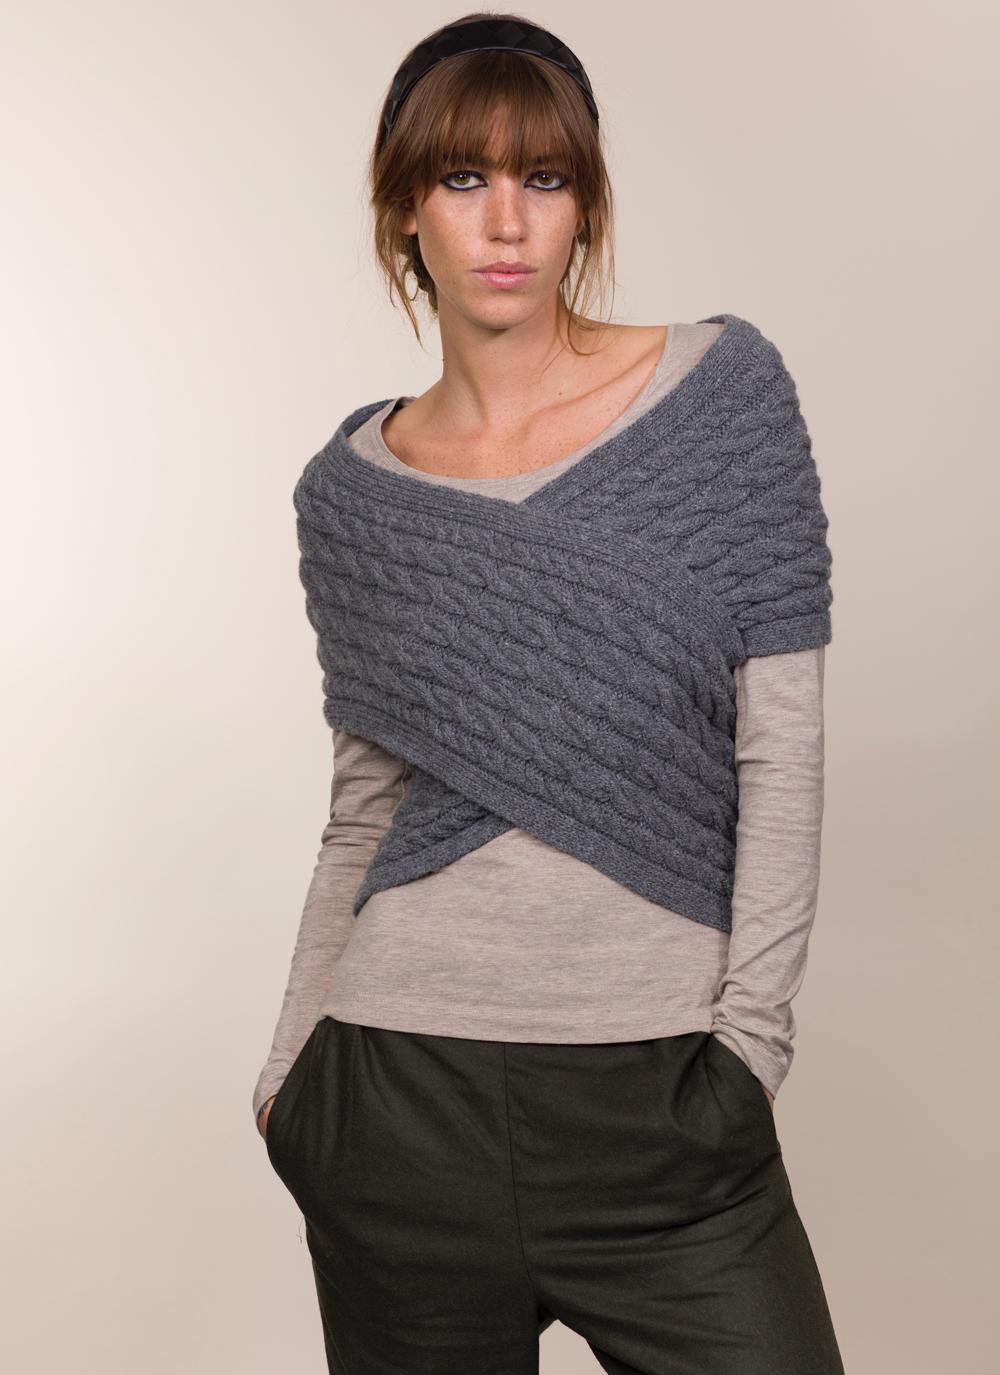 Women's Outlander Style Merino Wool and Cashmere Wrap